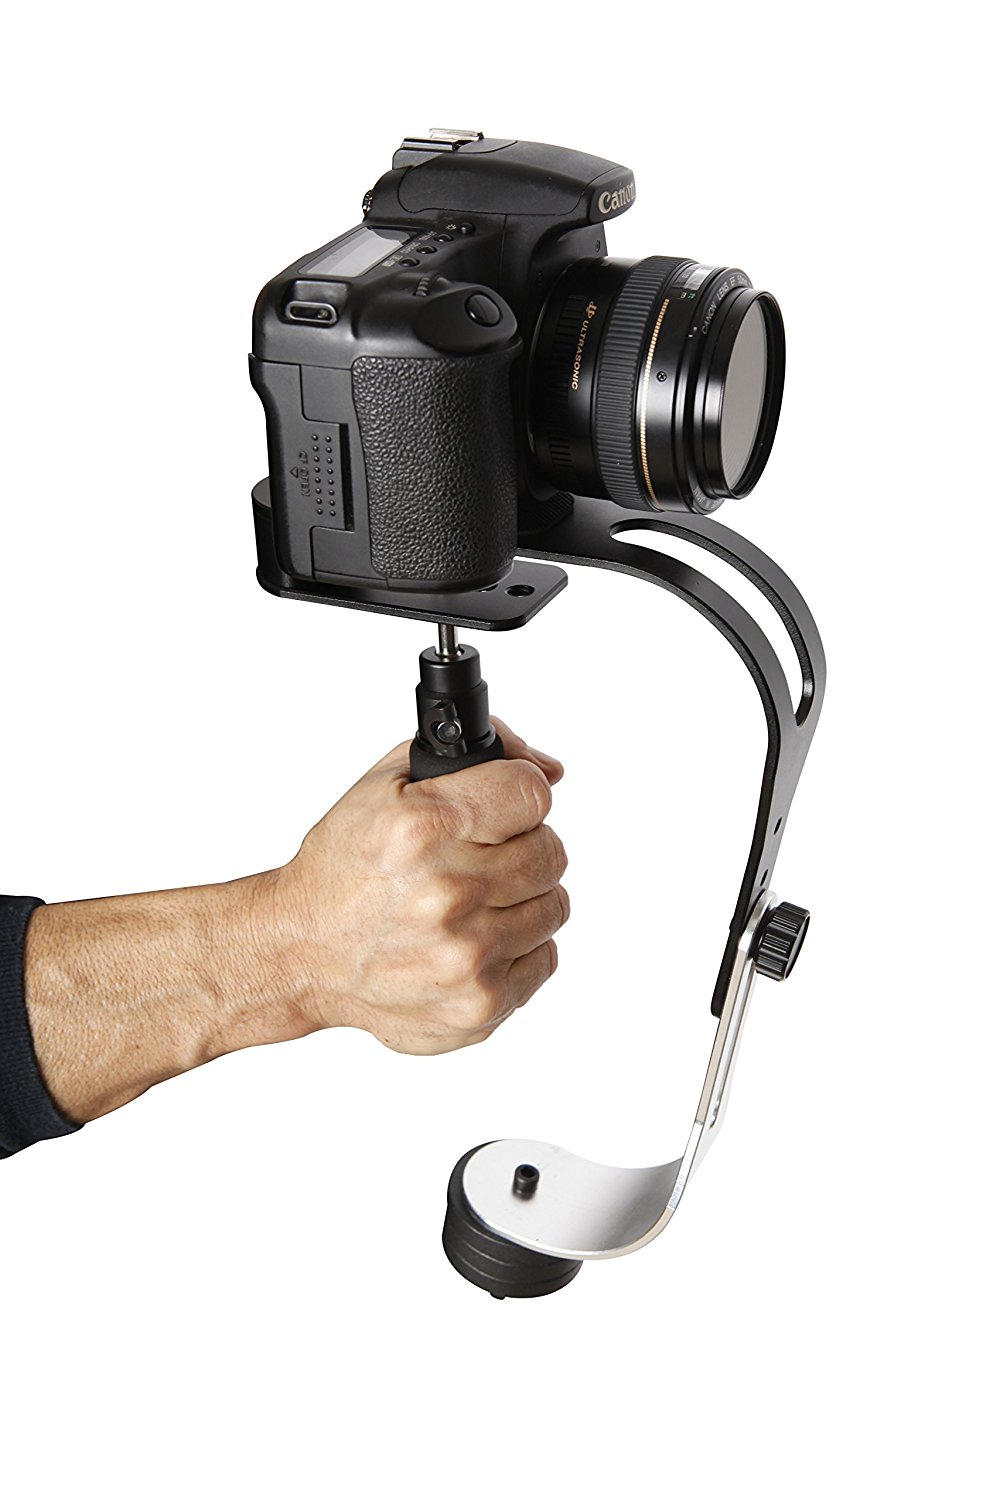 roxant pro gimbal stabilizer, best stabilizers, best camera stabilizers, best smartphone stabilizer